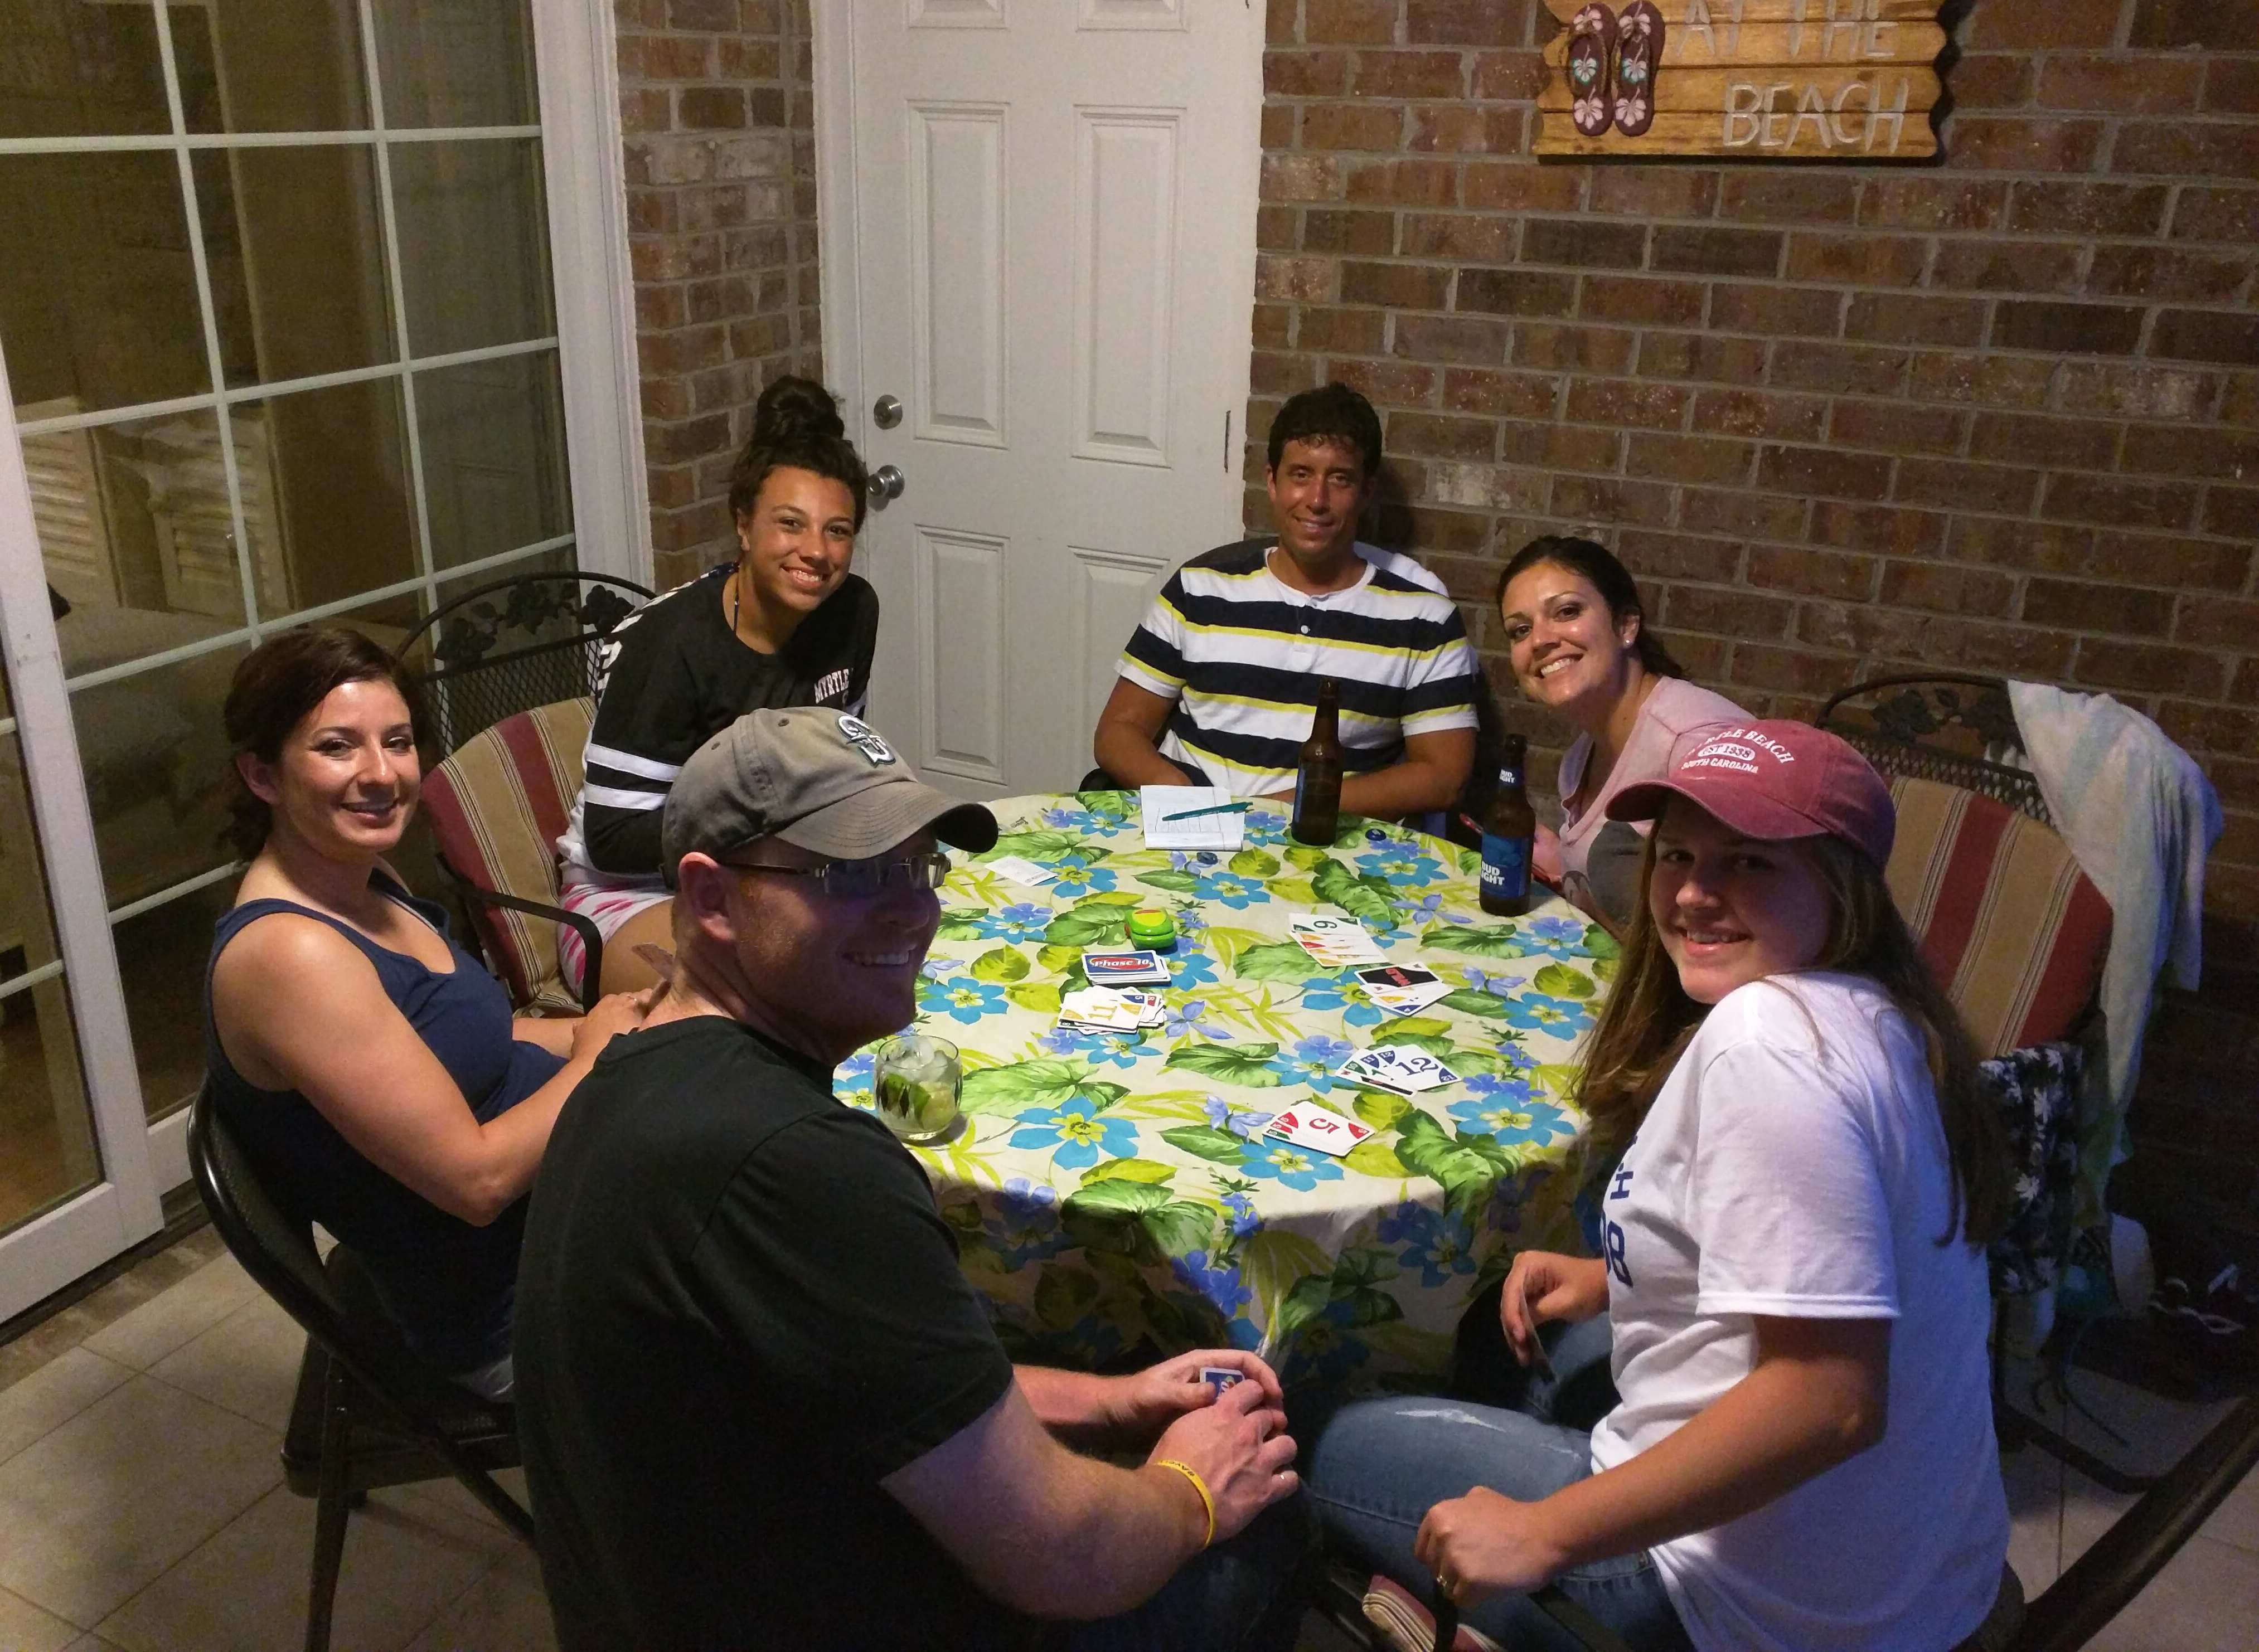 A group of us playing Phase 10 out on the condo porch area (photo credit to Jay).